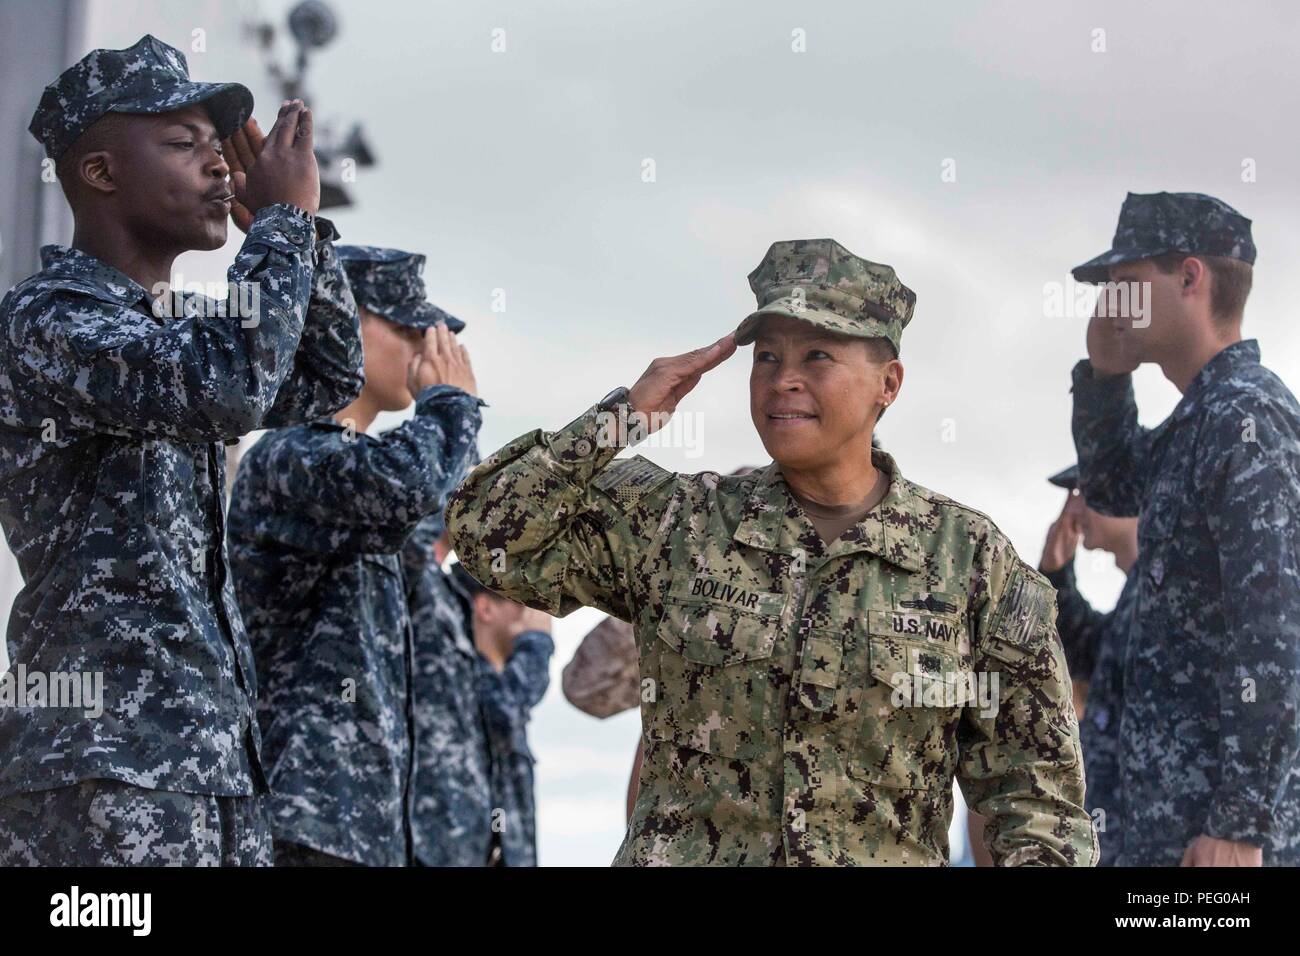 U.S. Navy sailors from the USS Ashland (LSD 48) render a salute to Rear Adm. Bette Bolivar, the commander of U.S. Naval Forces Marianas, as she boards the ship in Saipan, Aug. 9, 2015. The 31st Marine Expeditionary Unit and the ships of the Bonhomme Richard Amphibious Ready Group are assisting the Federal Emergency Management Agency with distributing emergency relief supplies to Saipan after the island was struck by Typhoon Soudelor Aug. 2-3. (U.S. Marine Corps photo by Lance Cpl. Brian Bekkala/Released) Stock Photo